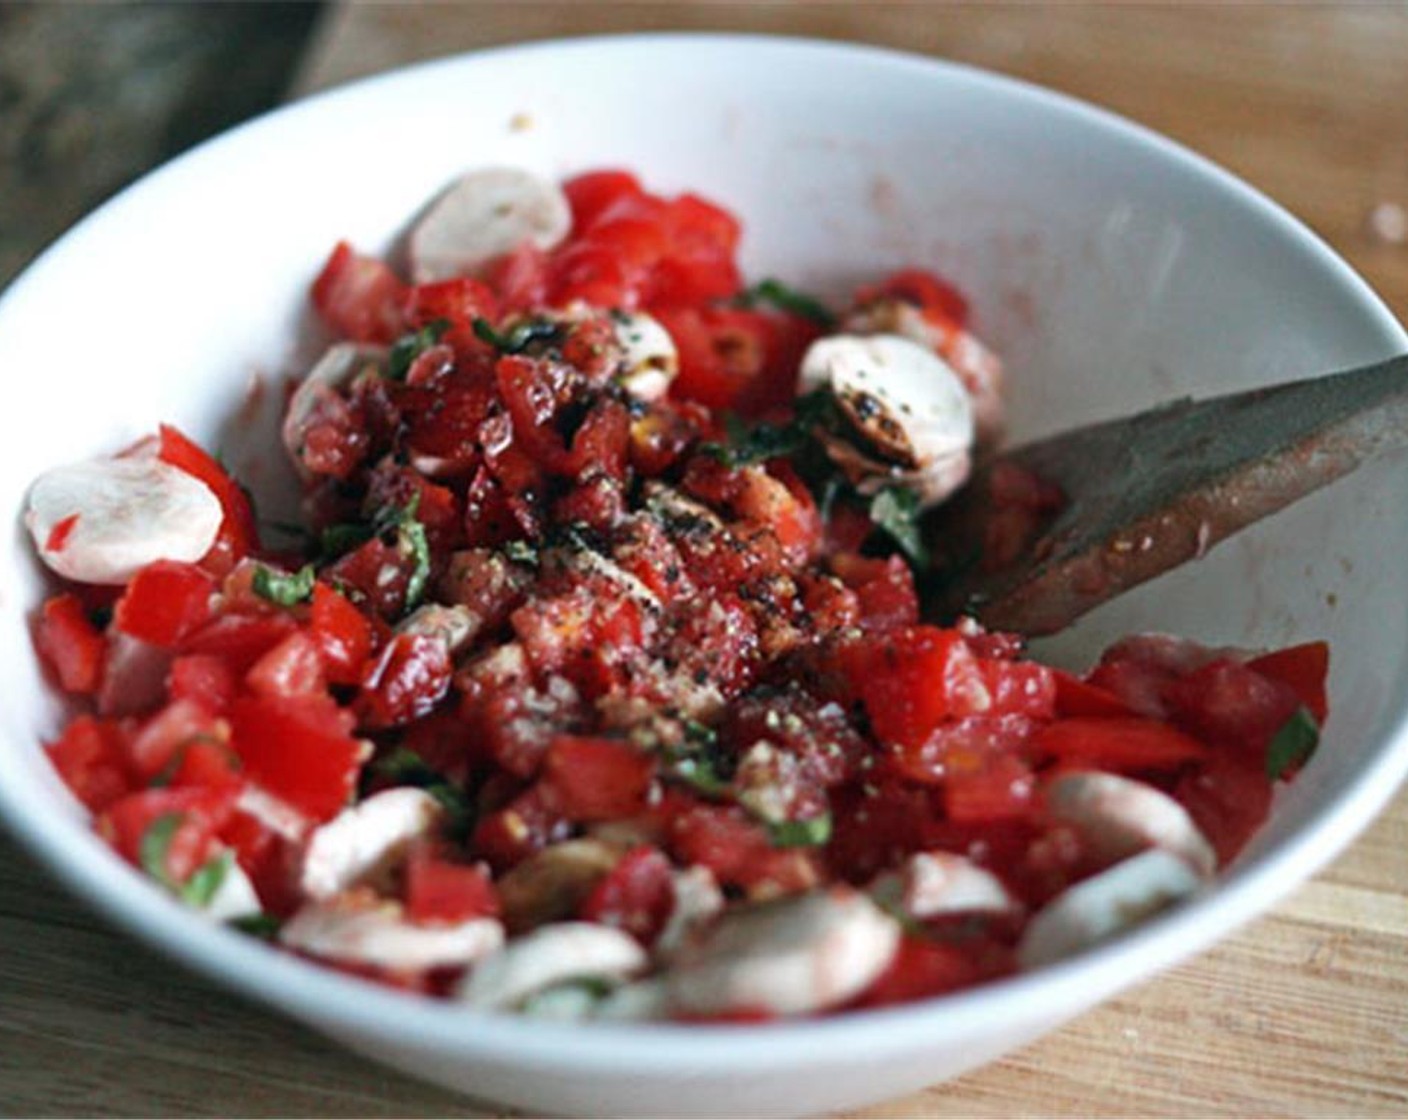 step 4 Add the diced tomatoes, mozzarella, and basil to the mixing bowl. Add the Balsamic Vinegar (1 Tbsp), Salt (1/2 tsp), and Ground Black Pepper (1/4 tsp) and mix thoroughly. Set the bowl aside while you prepare the bread.